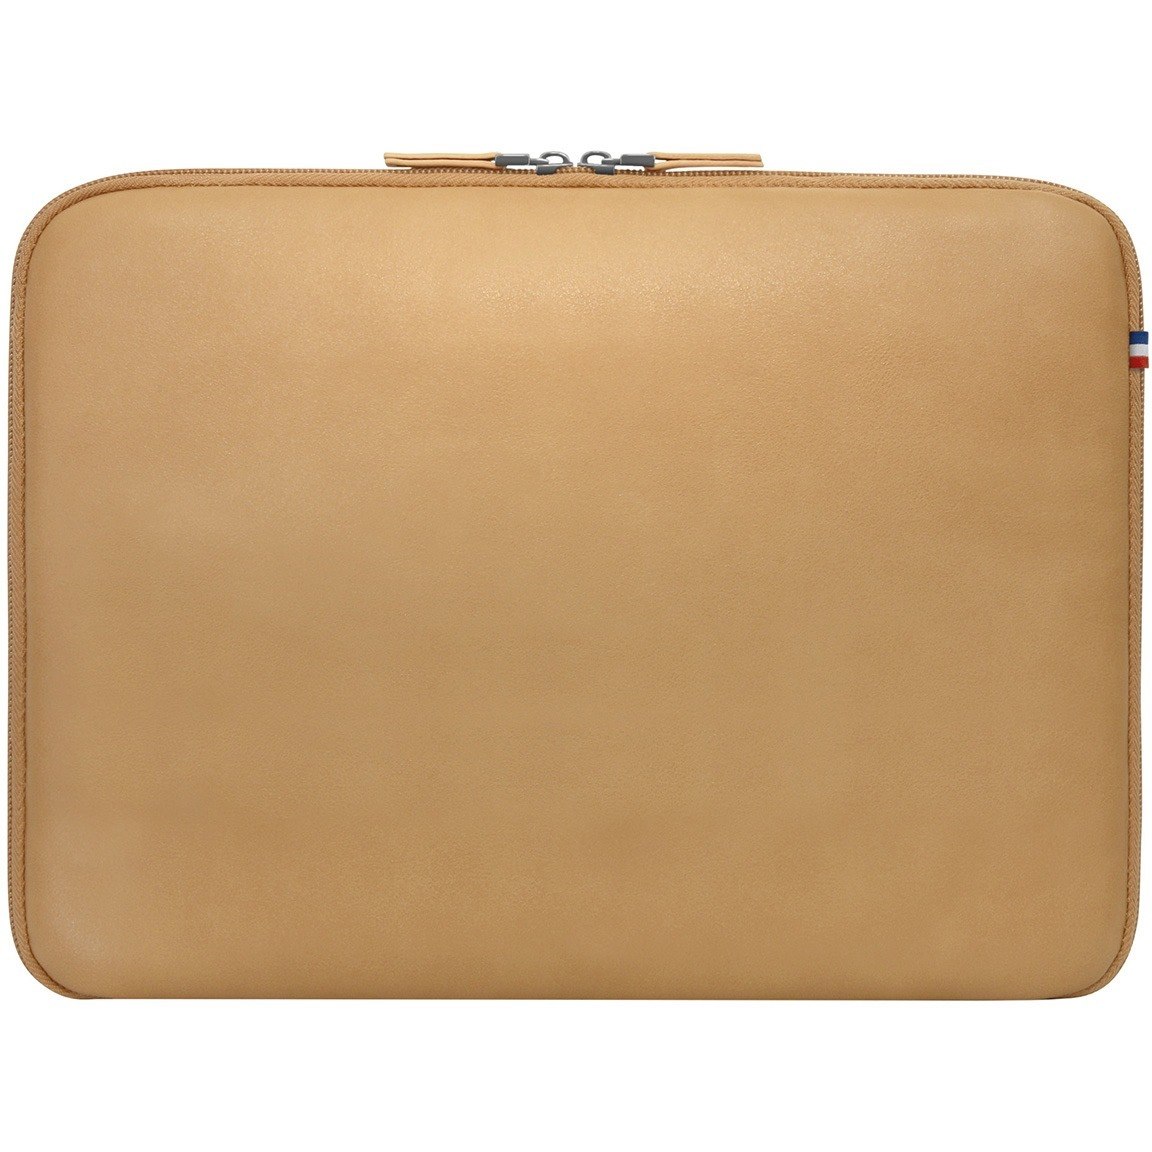 MOBILIS Origine Carrying Case (Sleeve) for 25.4 cm (10") to 31.8 cm (12.5") Apple MacBook, Notebook - Tan